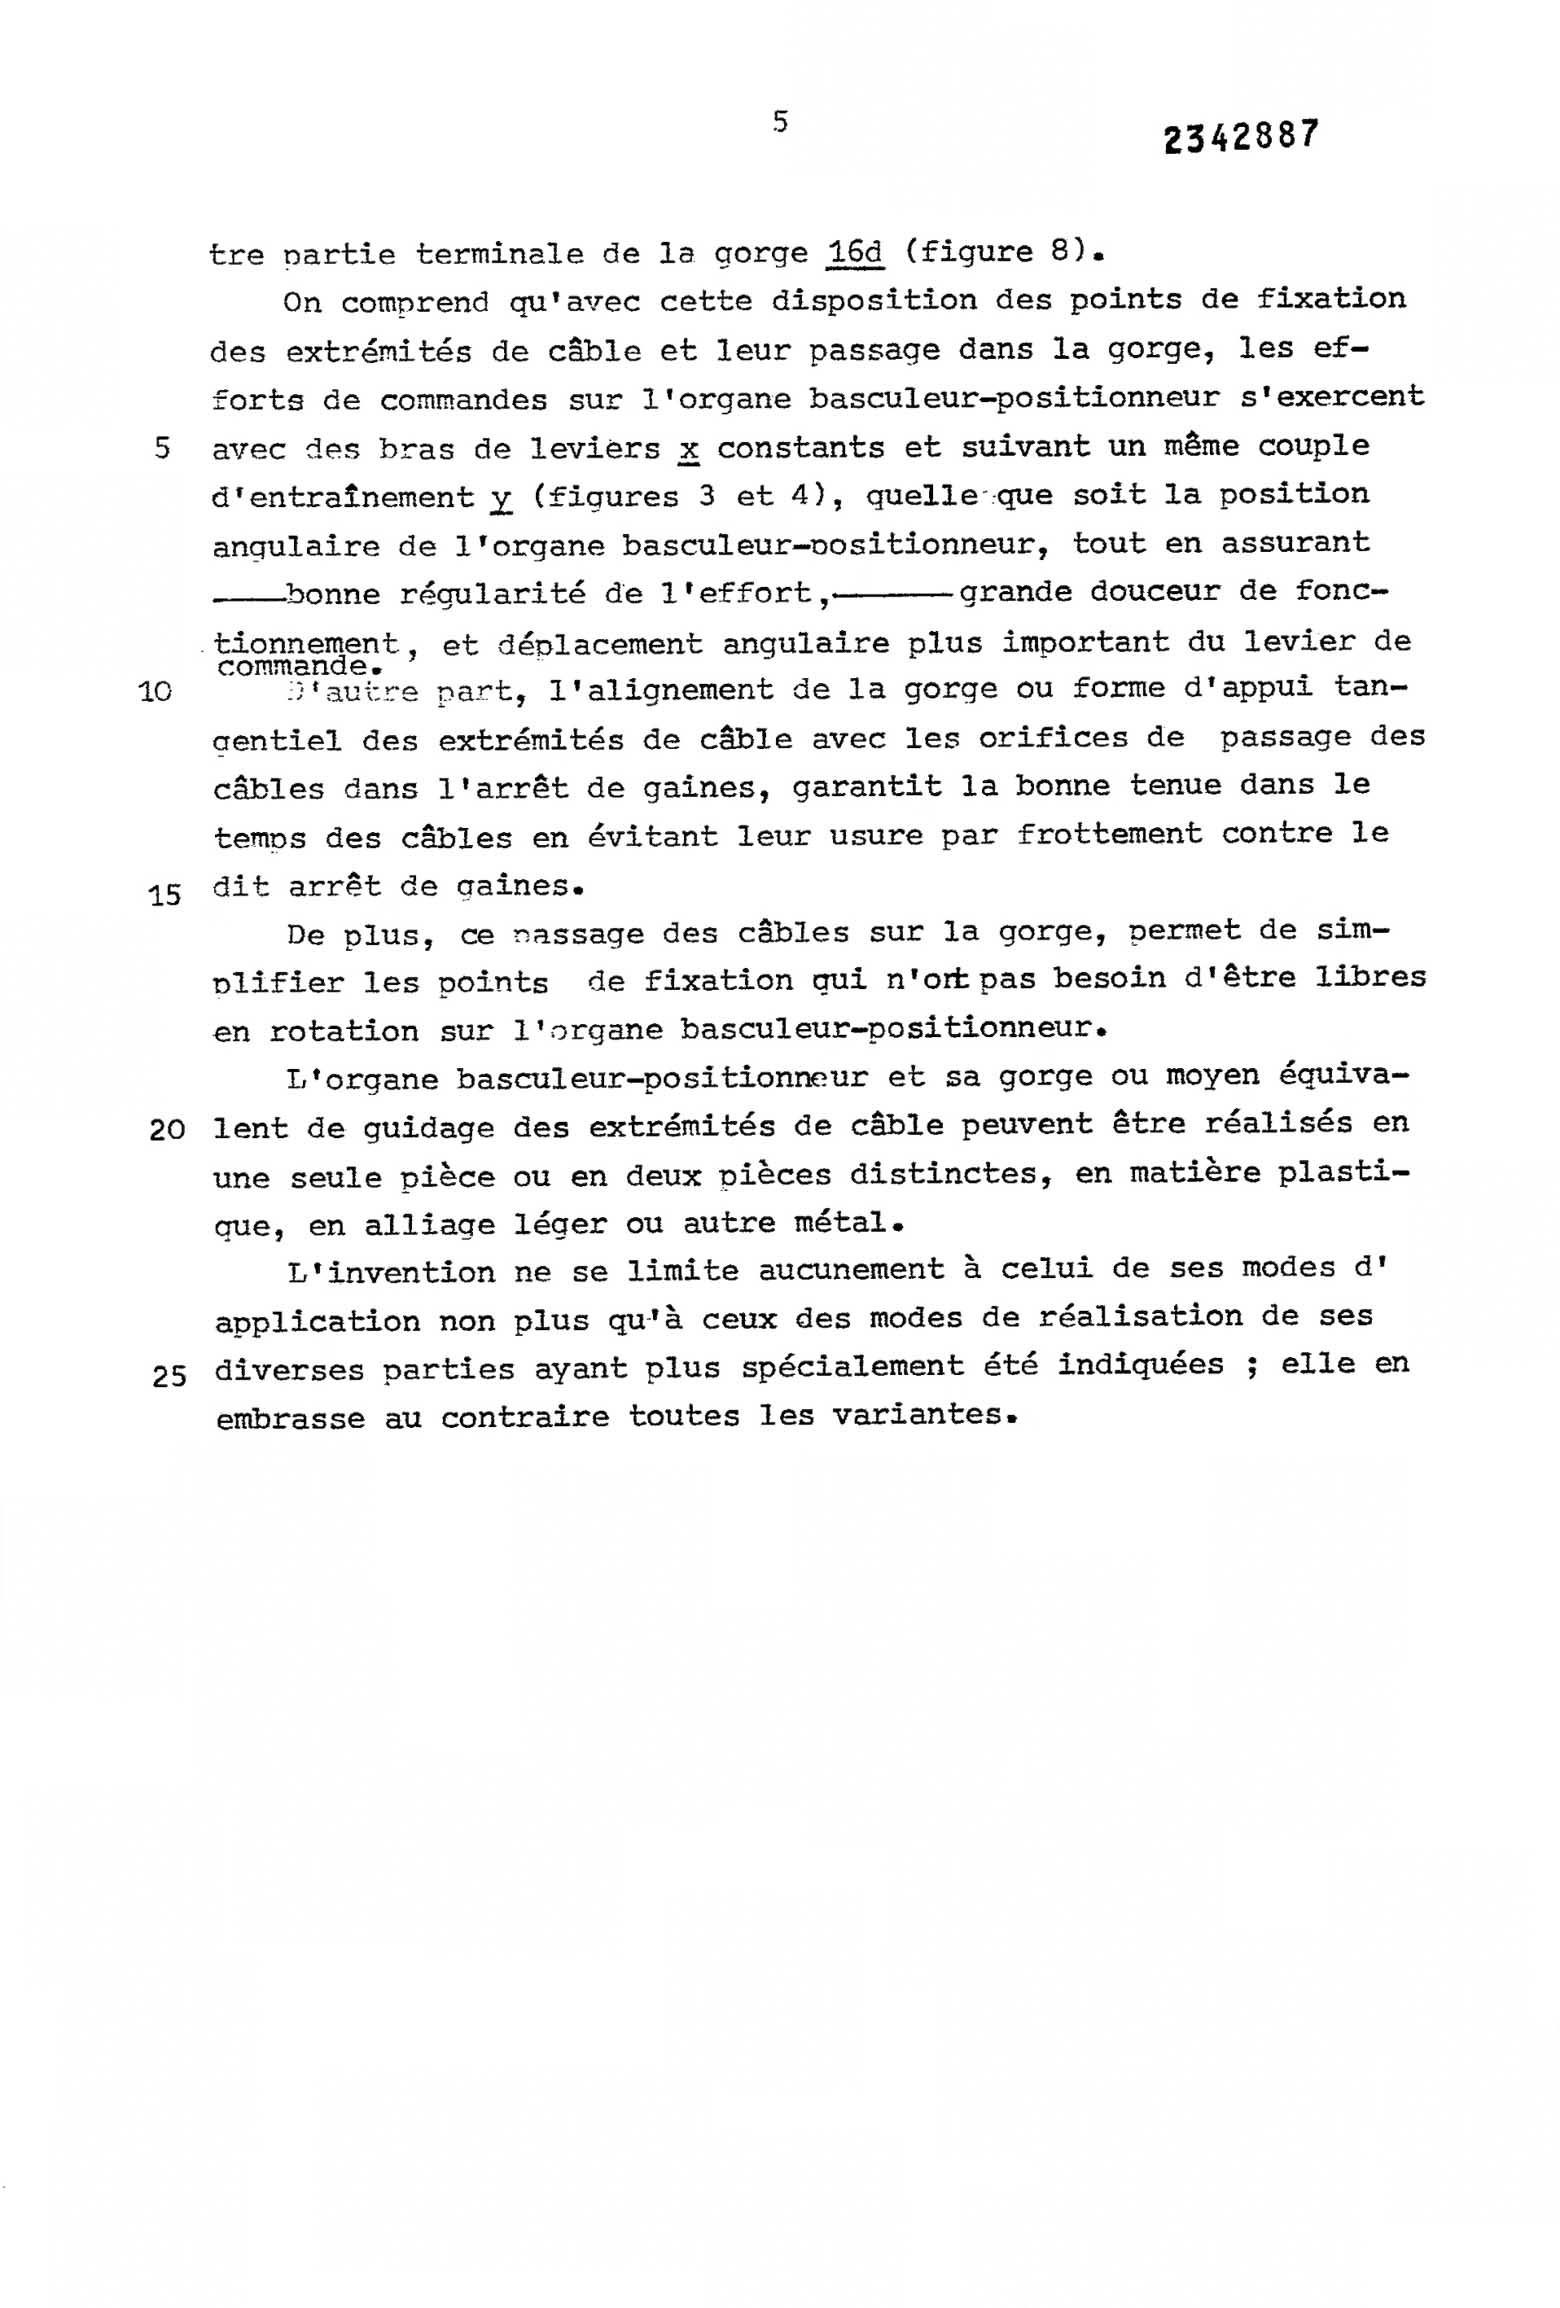 French Patent 2,342,887 scan 6 - Simplex main image